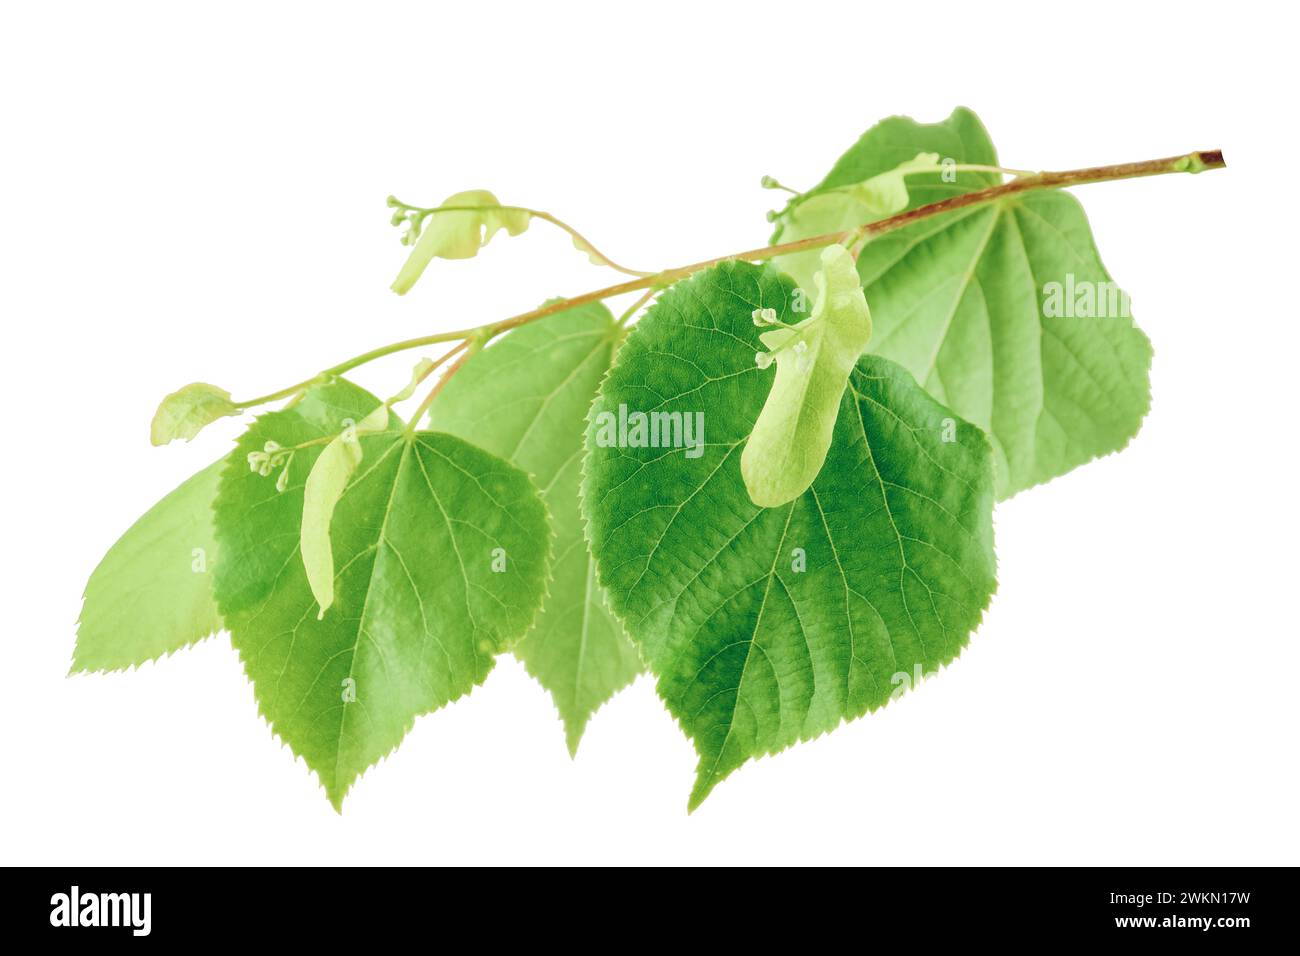 Spring Foliage. Linden flower tea. young linden leaves.  Linden tree  isolated on white. Pharmacy, apothecary, natural medicine, healing herbal tea, a Stock Photo